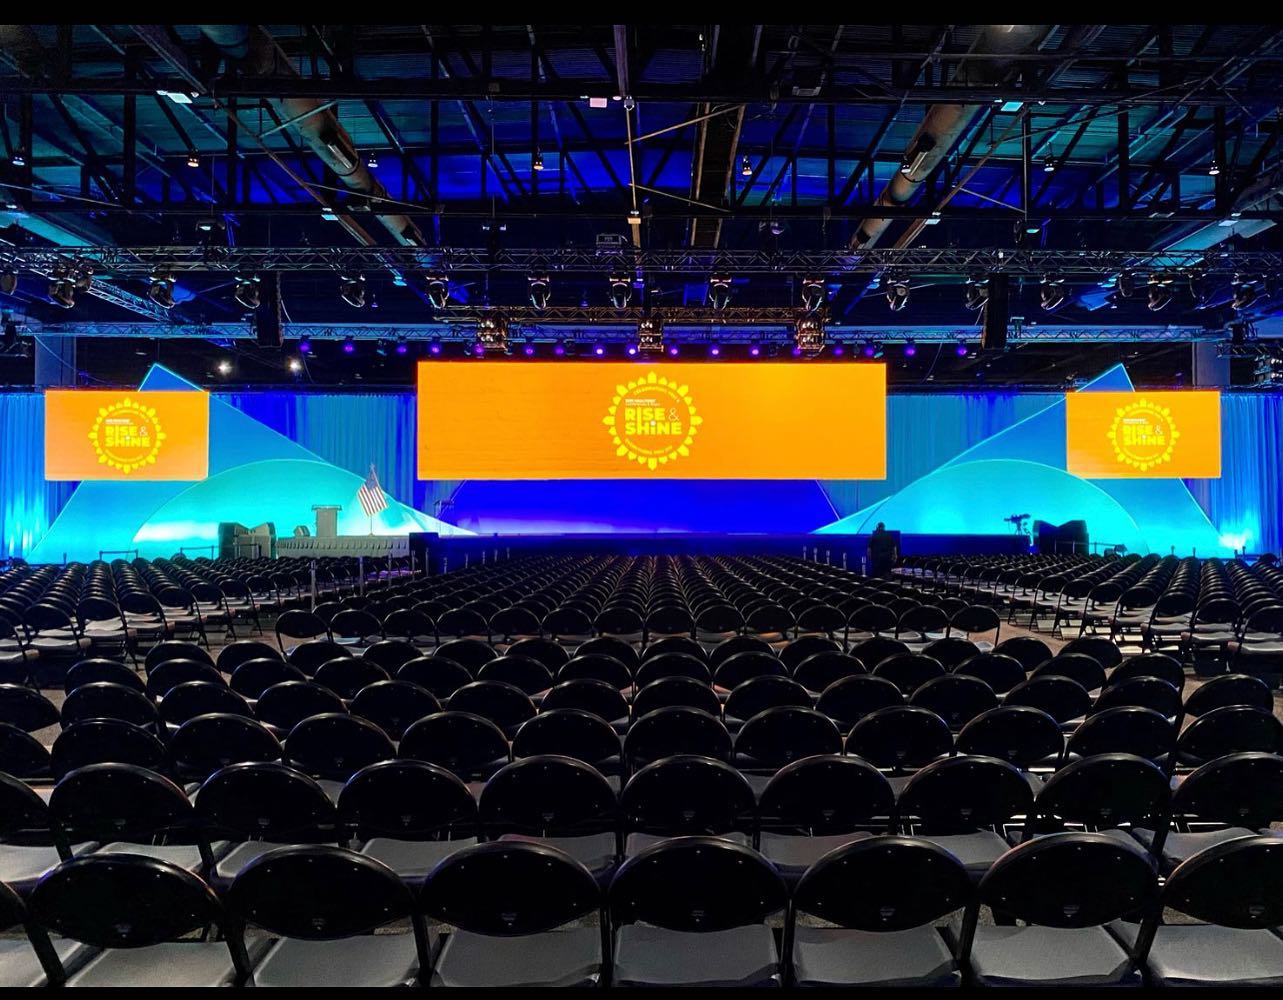 A large conference hall arranged with rows of chairs facing a stage with blue and yellow themed screens displaying 'RISE & SHINE' and emblems.